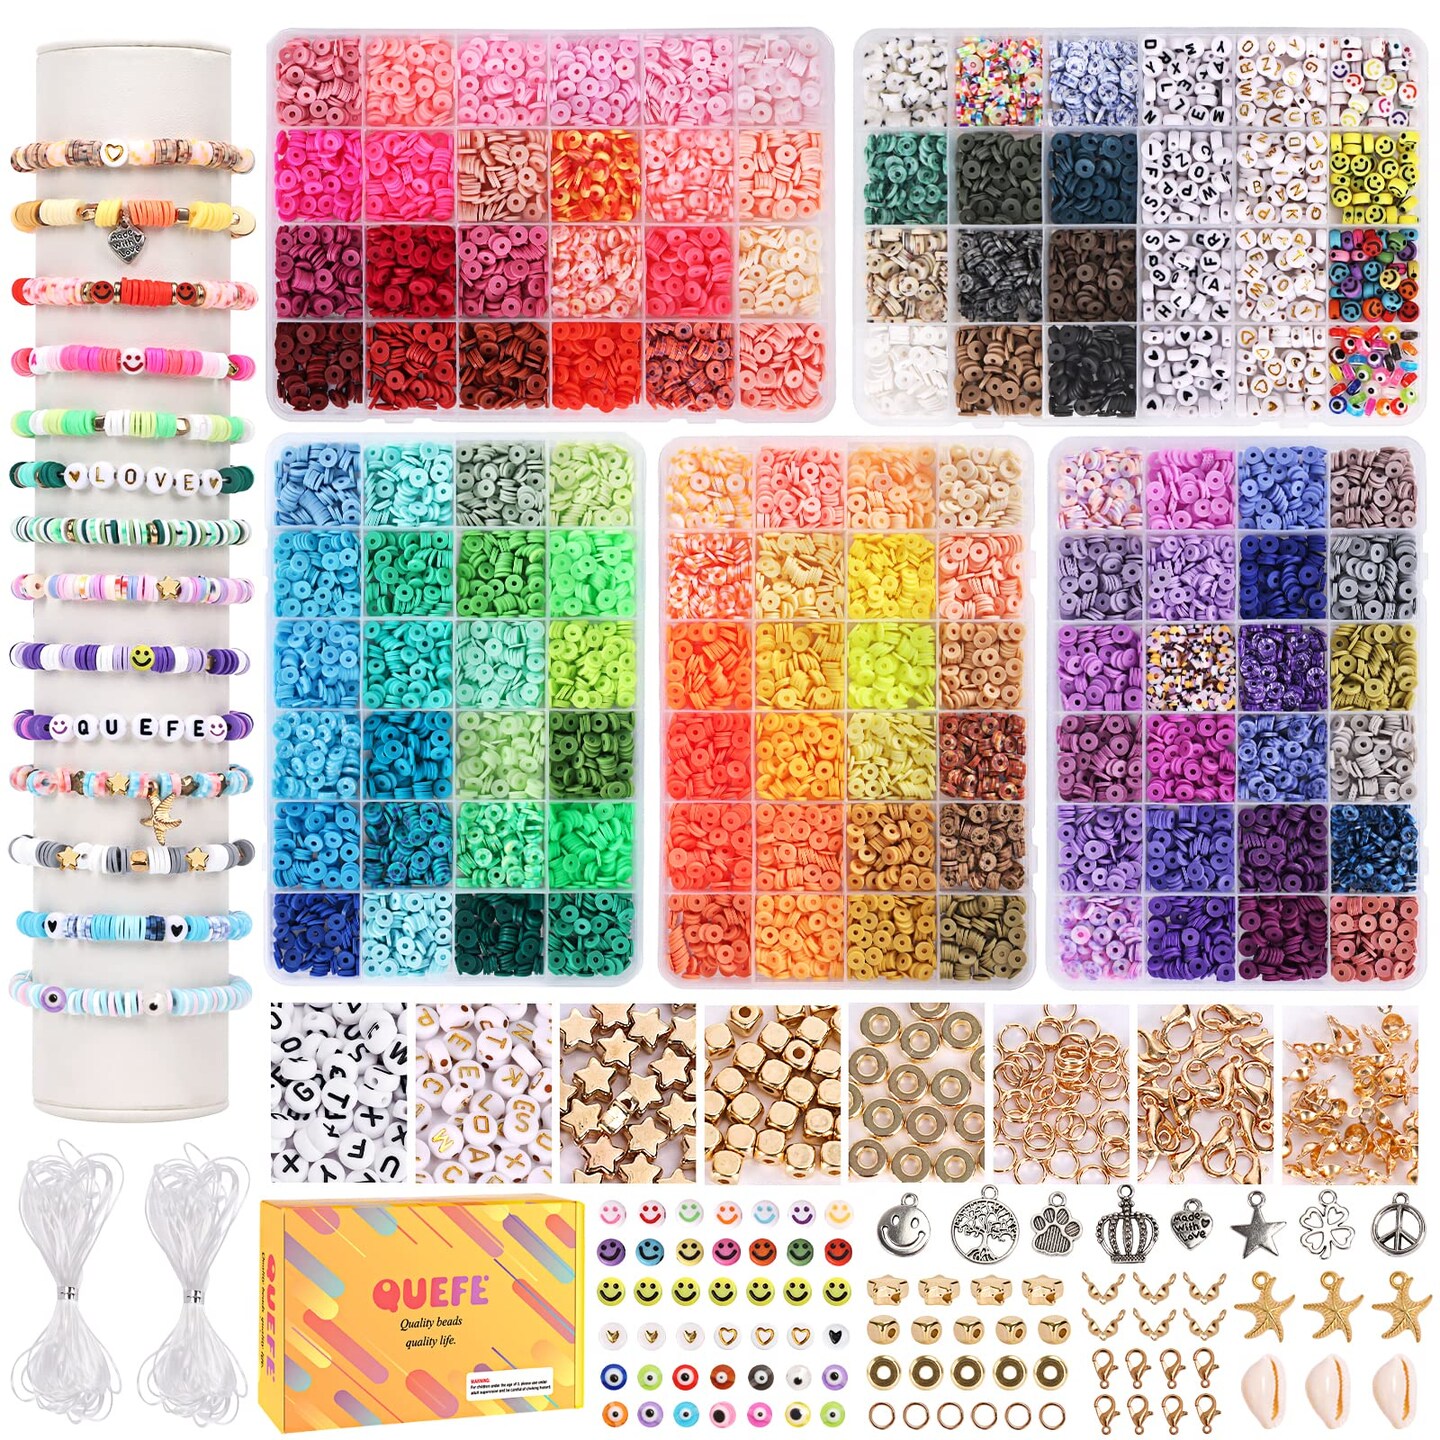 3D String Arts Crafts Kit for Kids Ages 8-12, Birthday Gifts for Kids with 30 Multicolored LED Bulbs, Crafts for Girls and Boys Ages 6-12 DIY